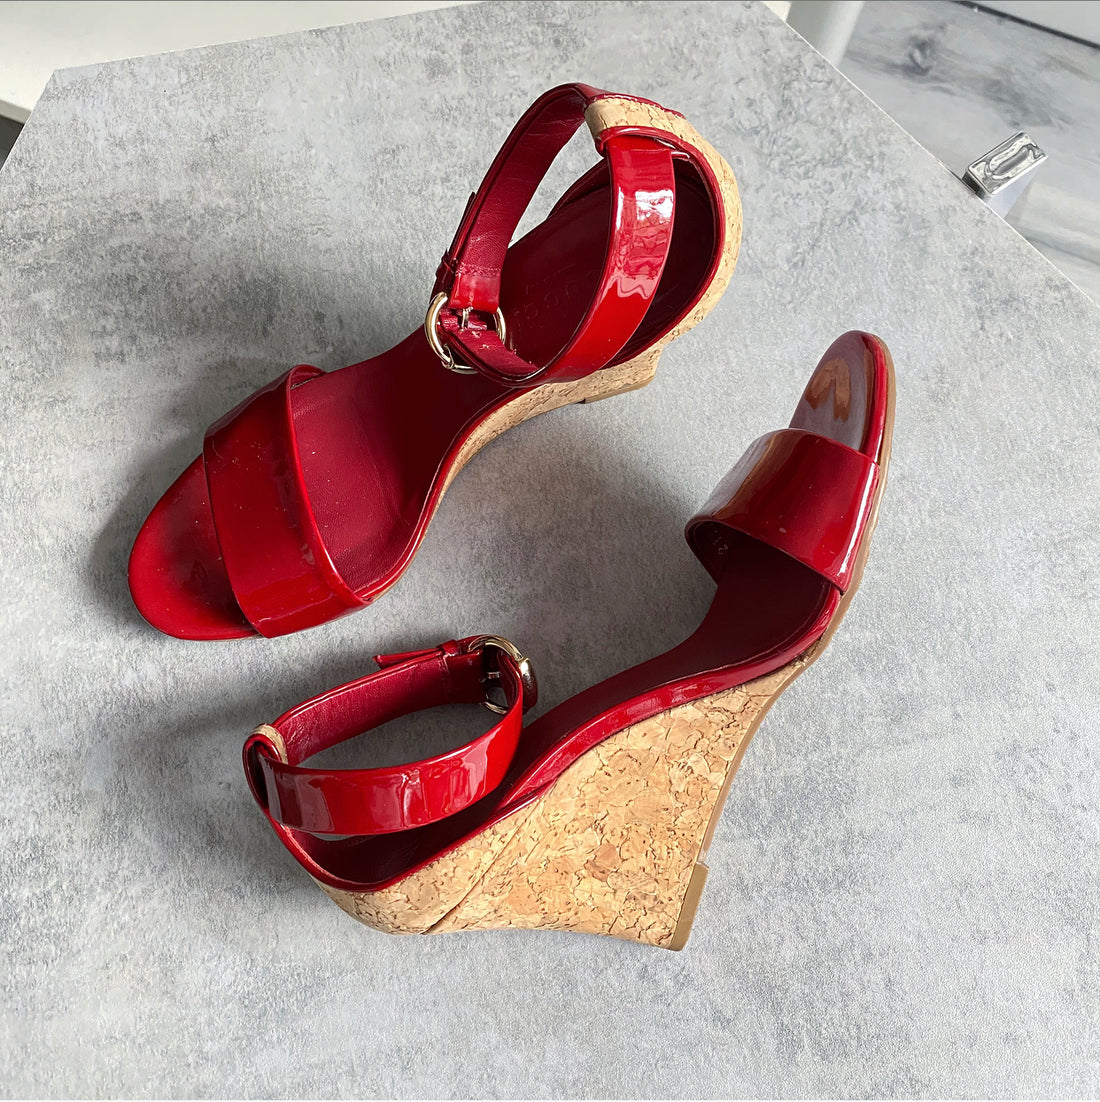 Gucci Red Patent Leather and Cork Wedge Sandals - 5.5